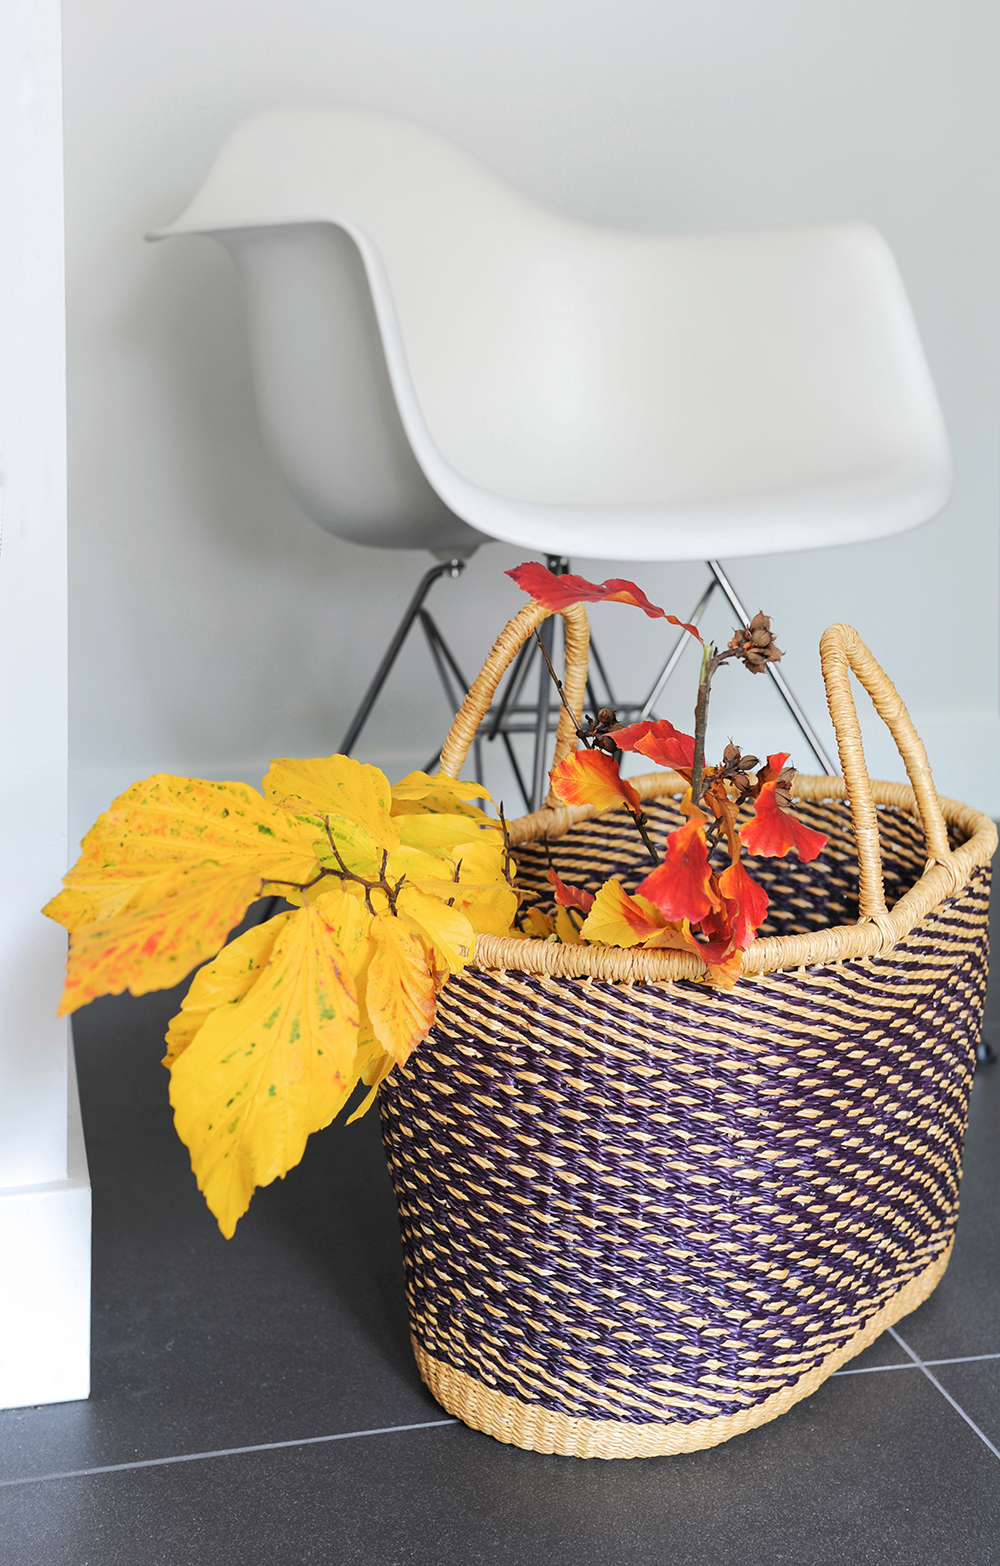 Textured basket introduces an organic element to the contemporary space.